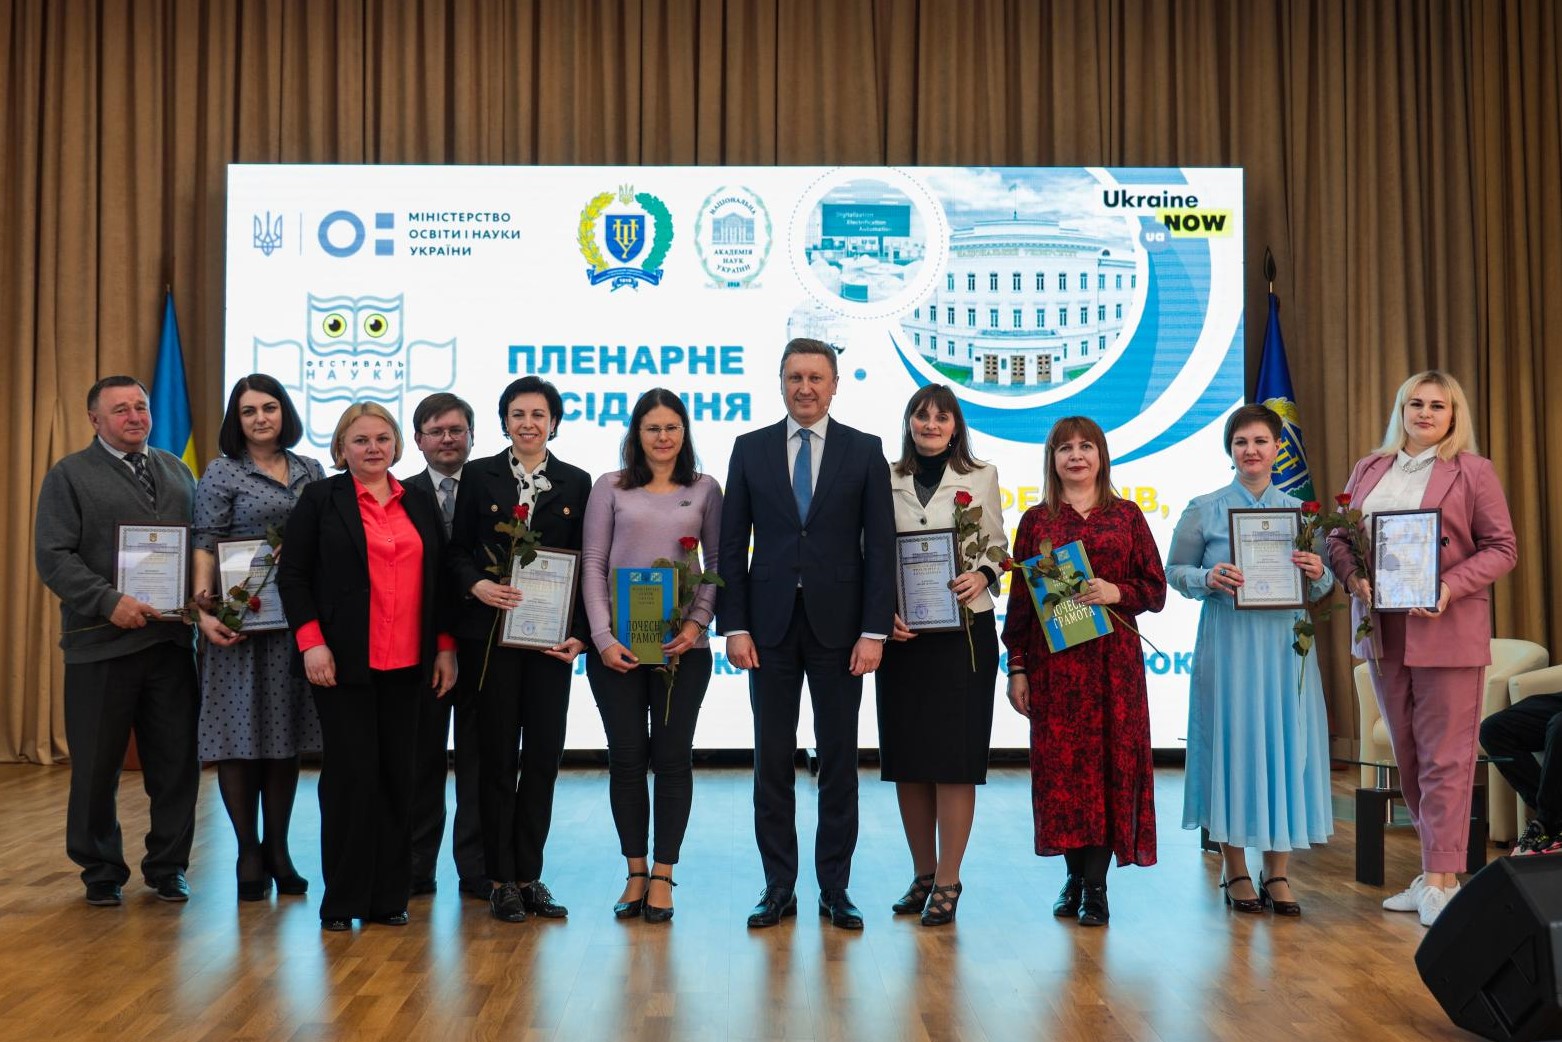 Polytechnic scientists are presented with the awards of the Ministry of Education and Culture of Ukraine for their high professionalism and significant personal contribution to the development of education